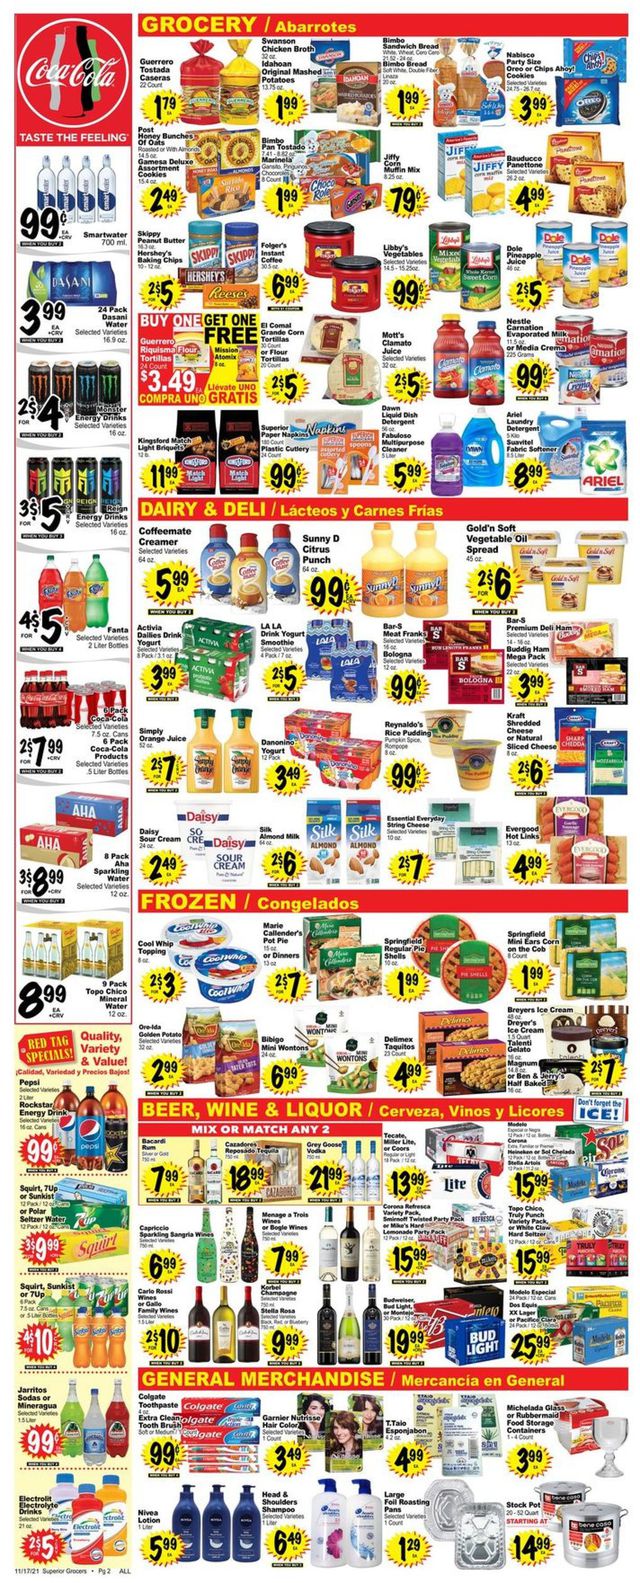 Superior Grocers Ad from 11/17/2021